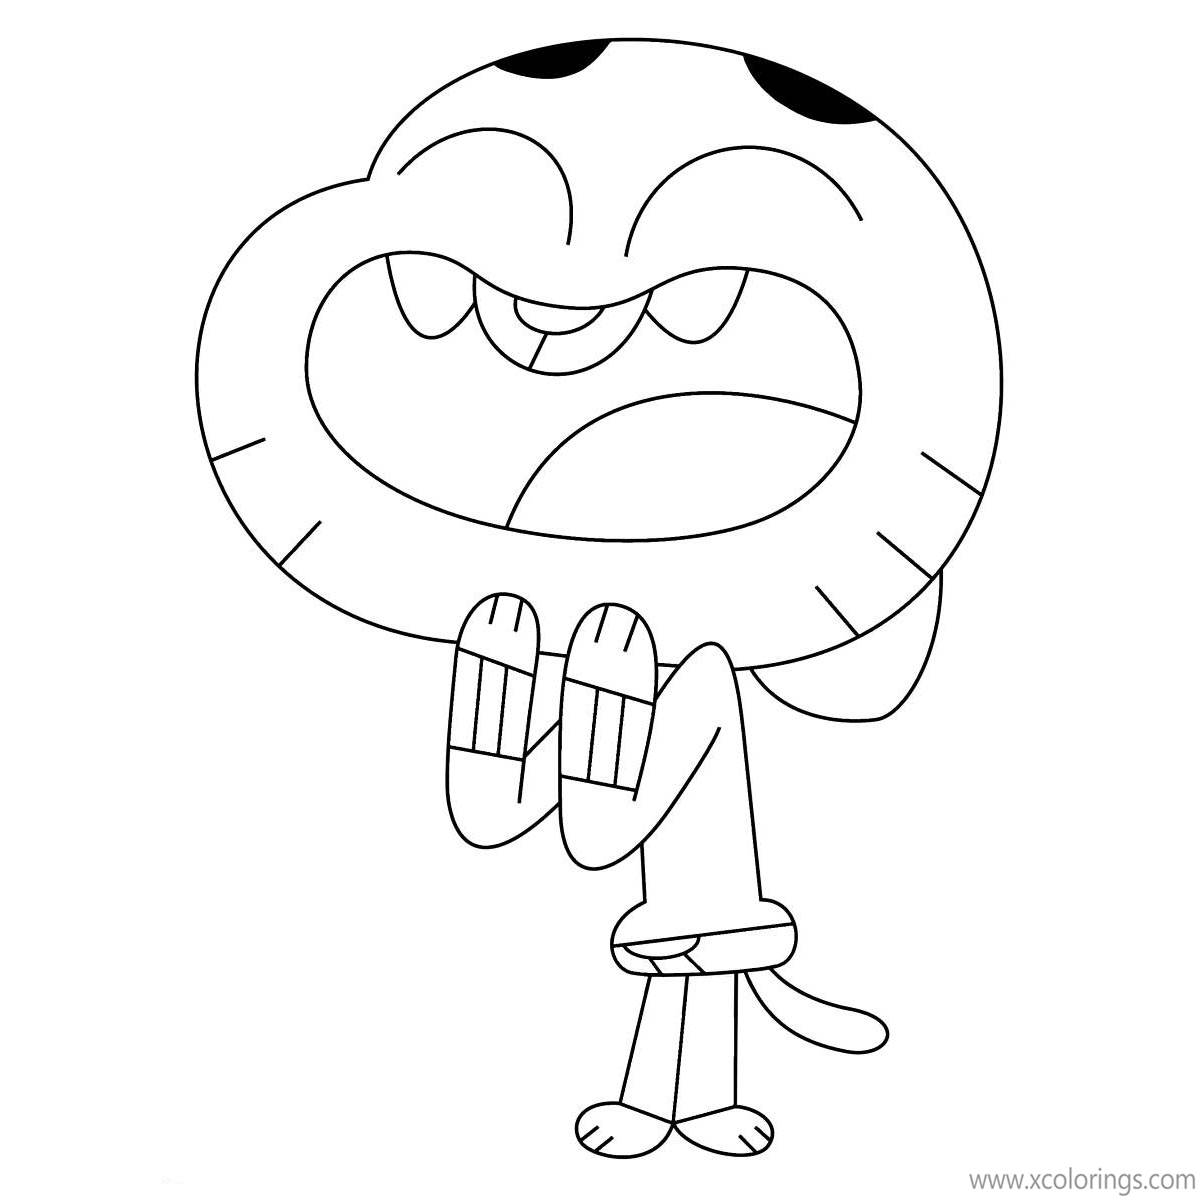 Free The Amazing World of Gumball Coloring Pages Gumball is Laughing printable